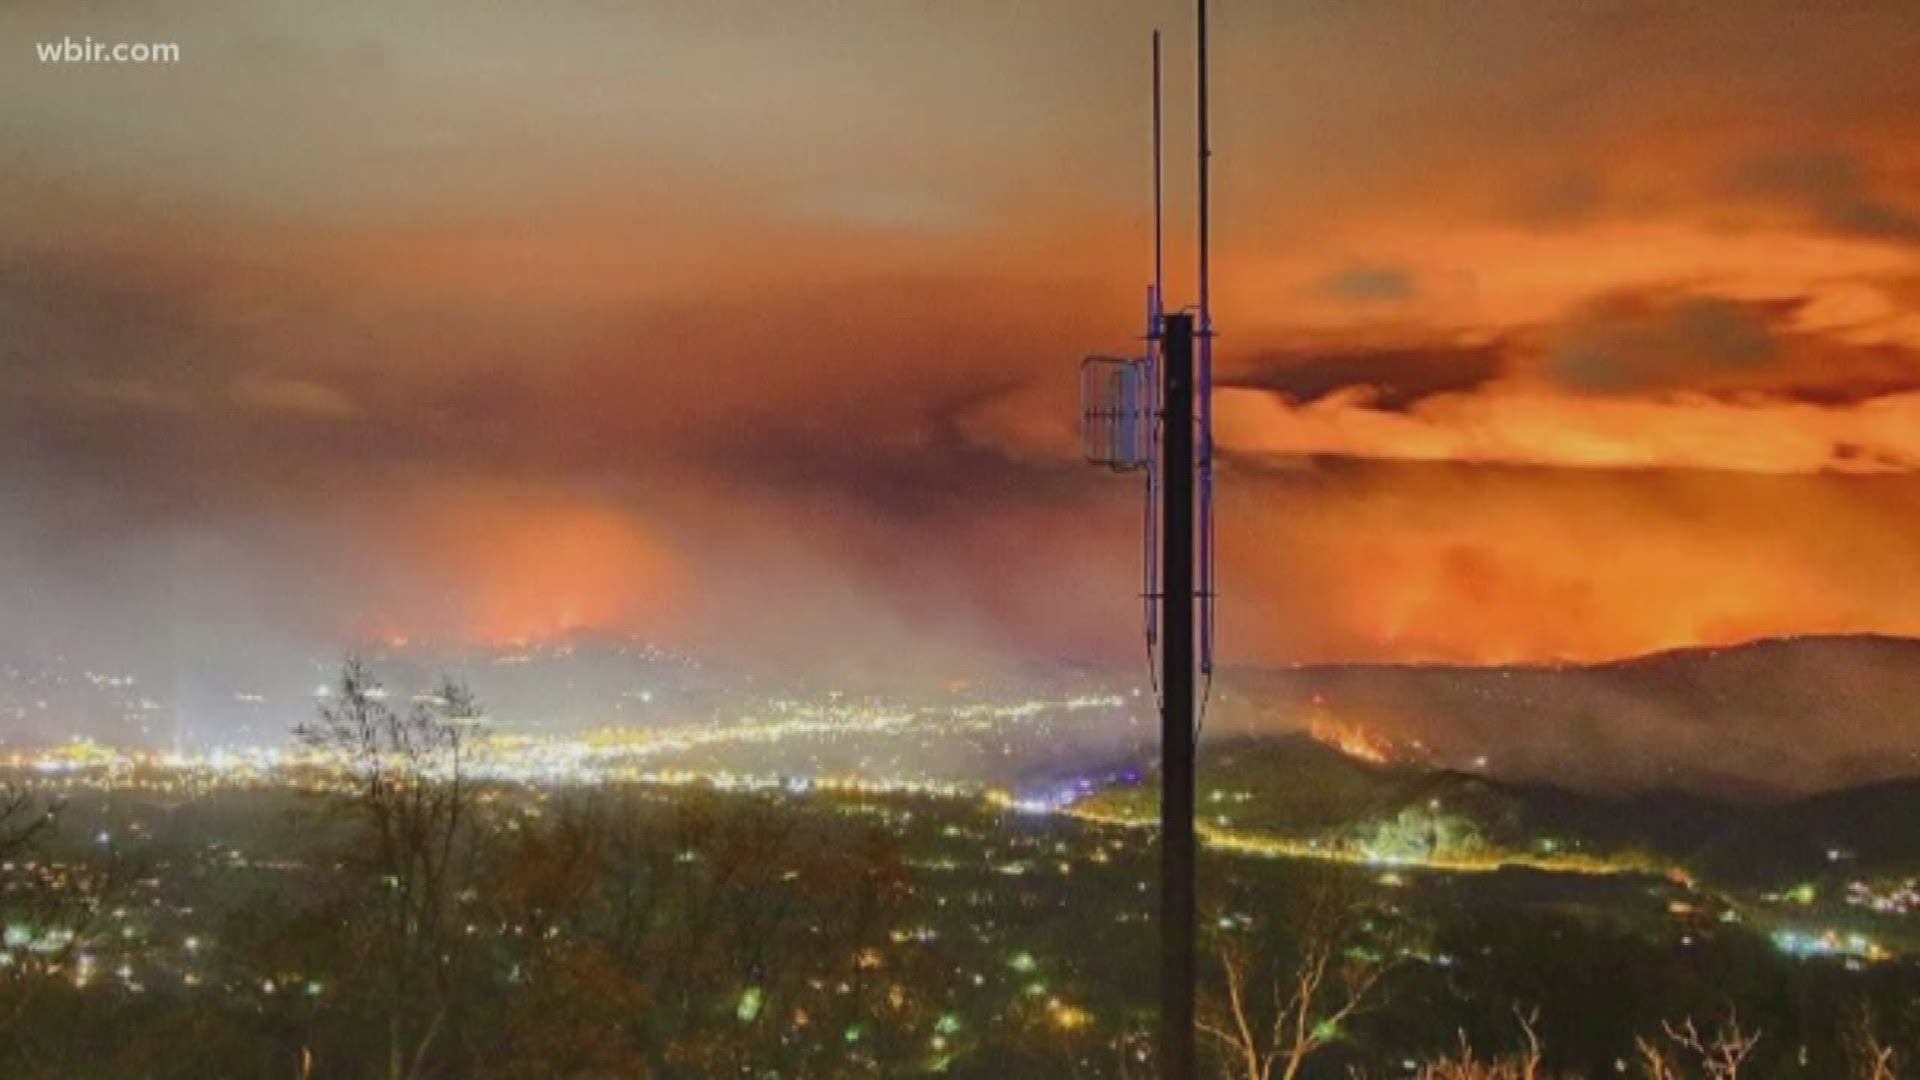 In 2016,  a wildfire swept out of the Smokies and into Gatlinburg, taking 14 lives and changing the lives of countless others.